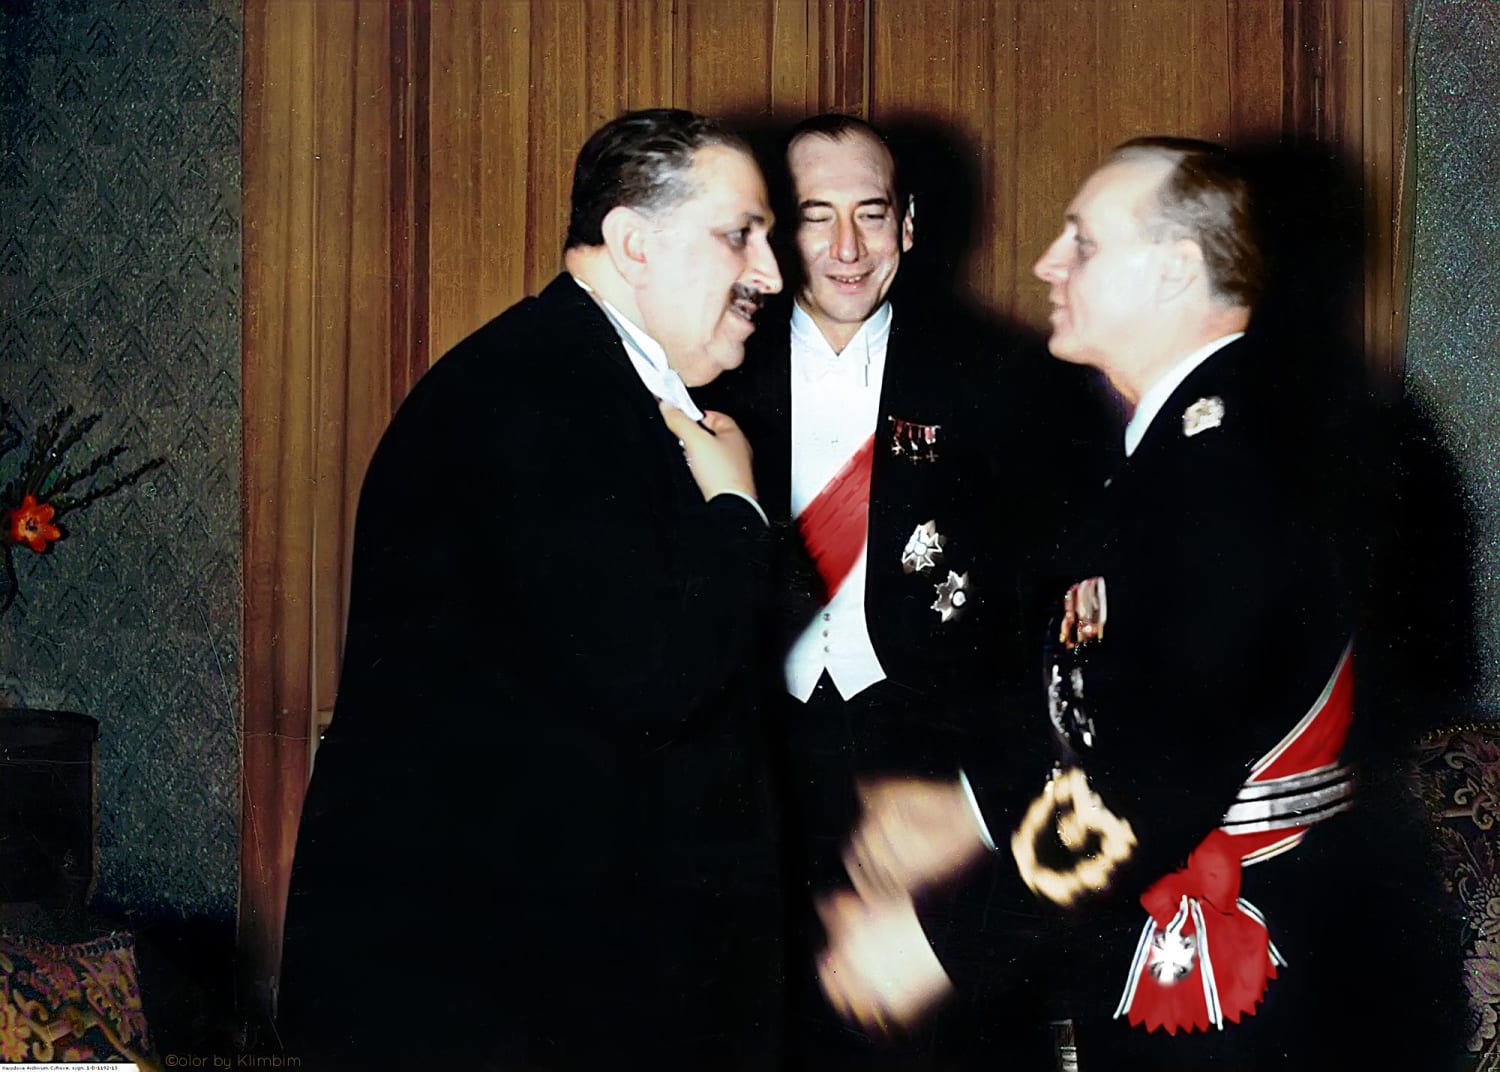 Preparations for WW2: Polish Deputy Minister of Foreign Affairs Jan Szembek (left) greets Minister Joachim von Ribbentrop during a banquet at the Ministry of Foreign Affairs. In the center the Minister of Foreign Affairs, Józef Beck. Warsaw 1939